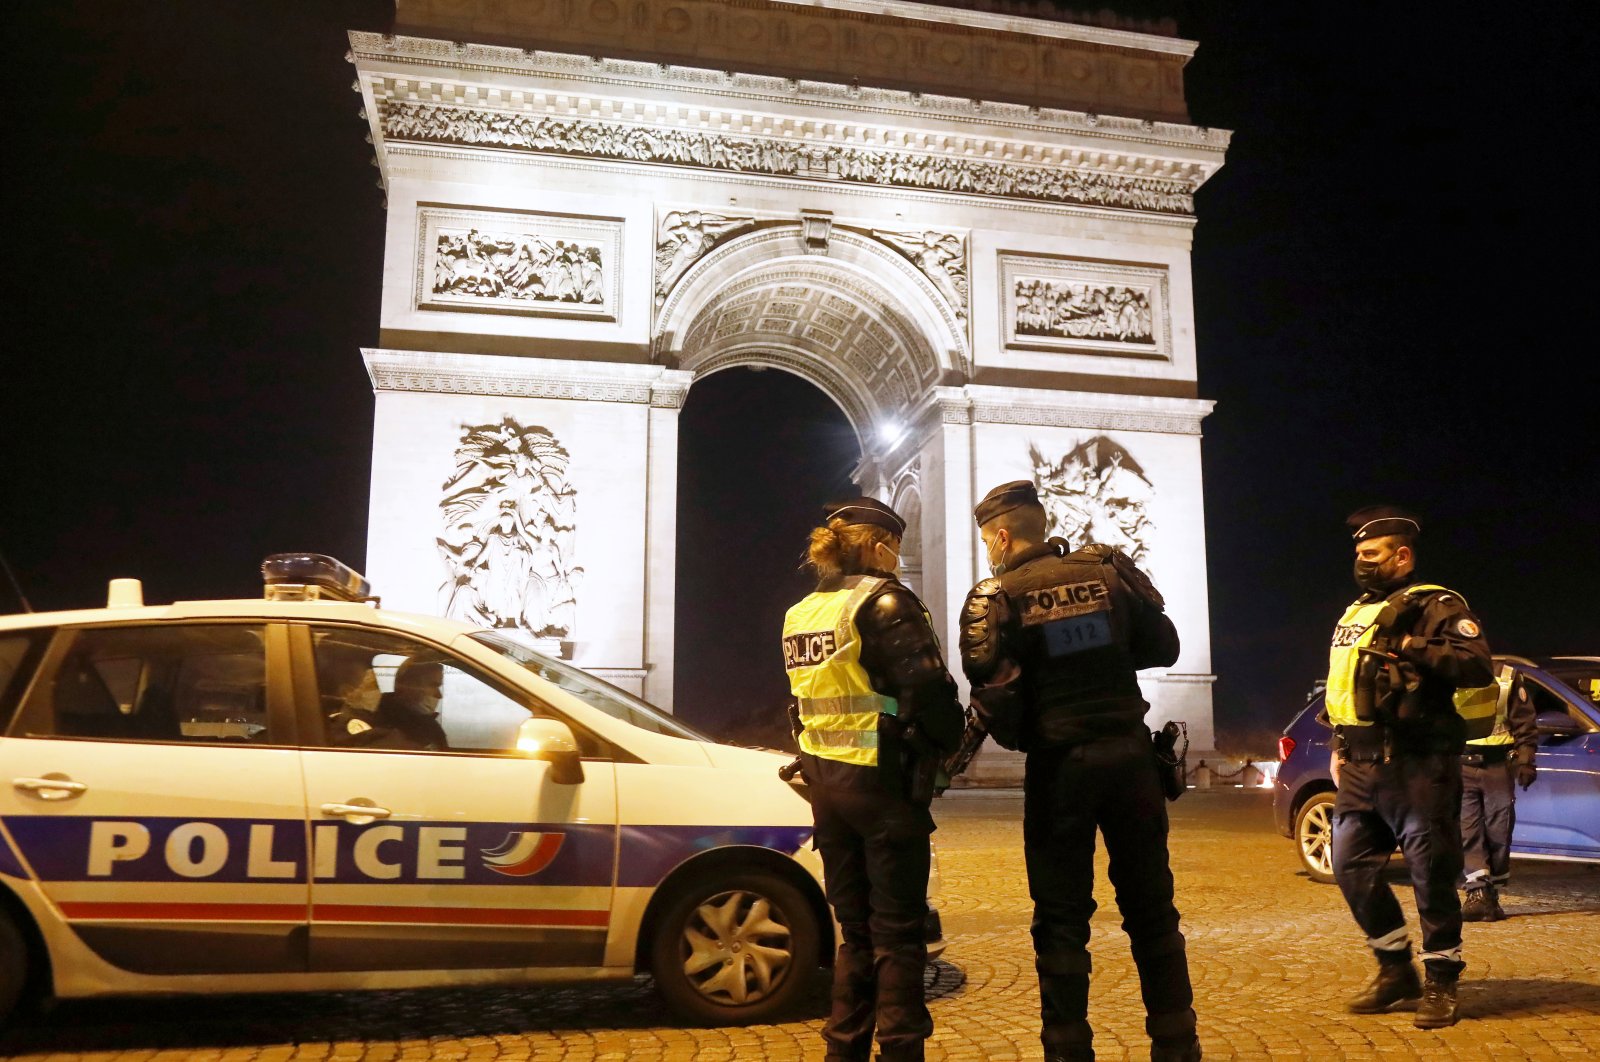 French police patrol in front of the Arc de Triomphe on Champs Elysees avenue on New Year's Eve, after celebrations and gatherings were banned due to coronavirus restrictions, in Paris, France, Dec. 31, 2020. (Reuters Photo)